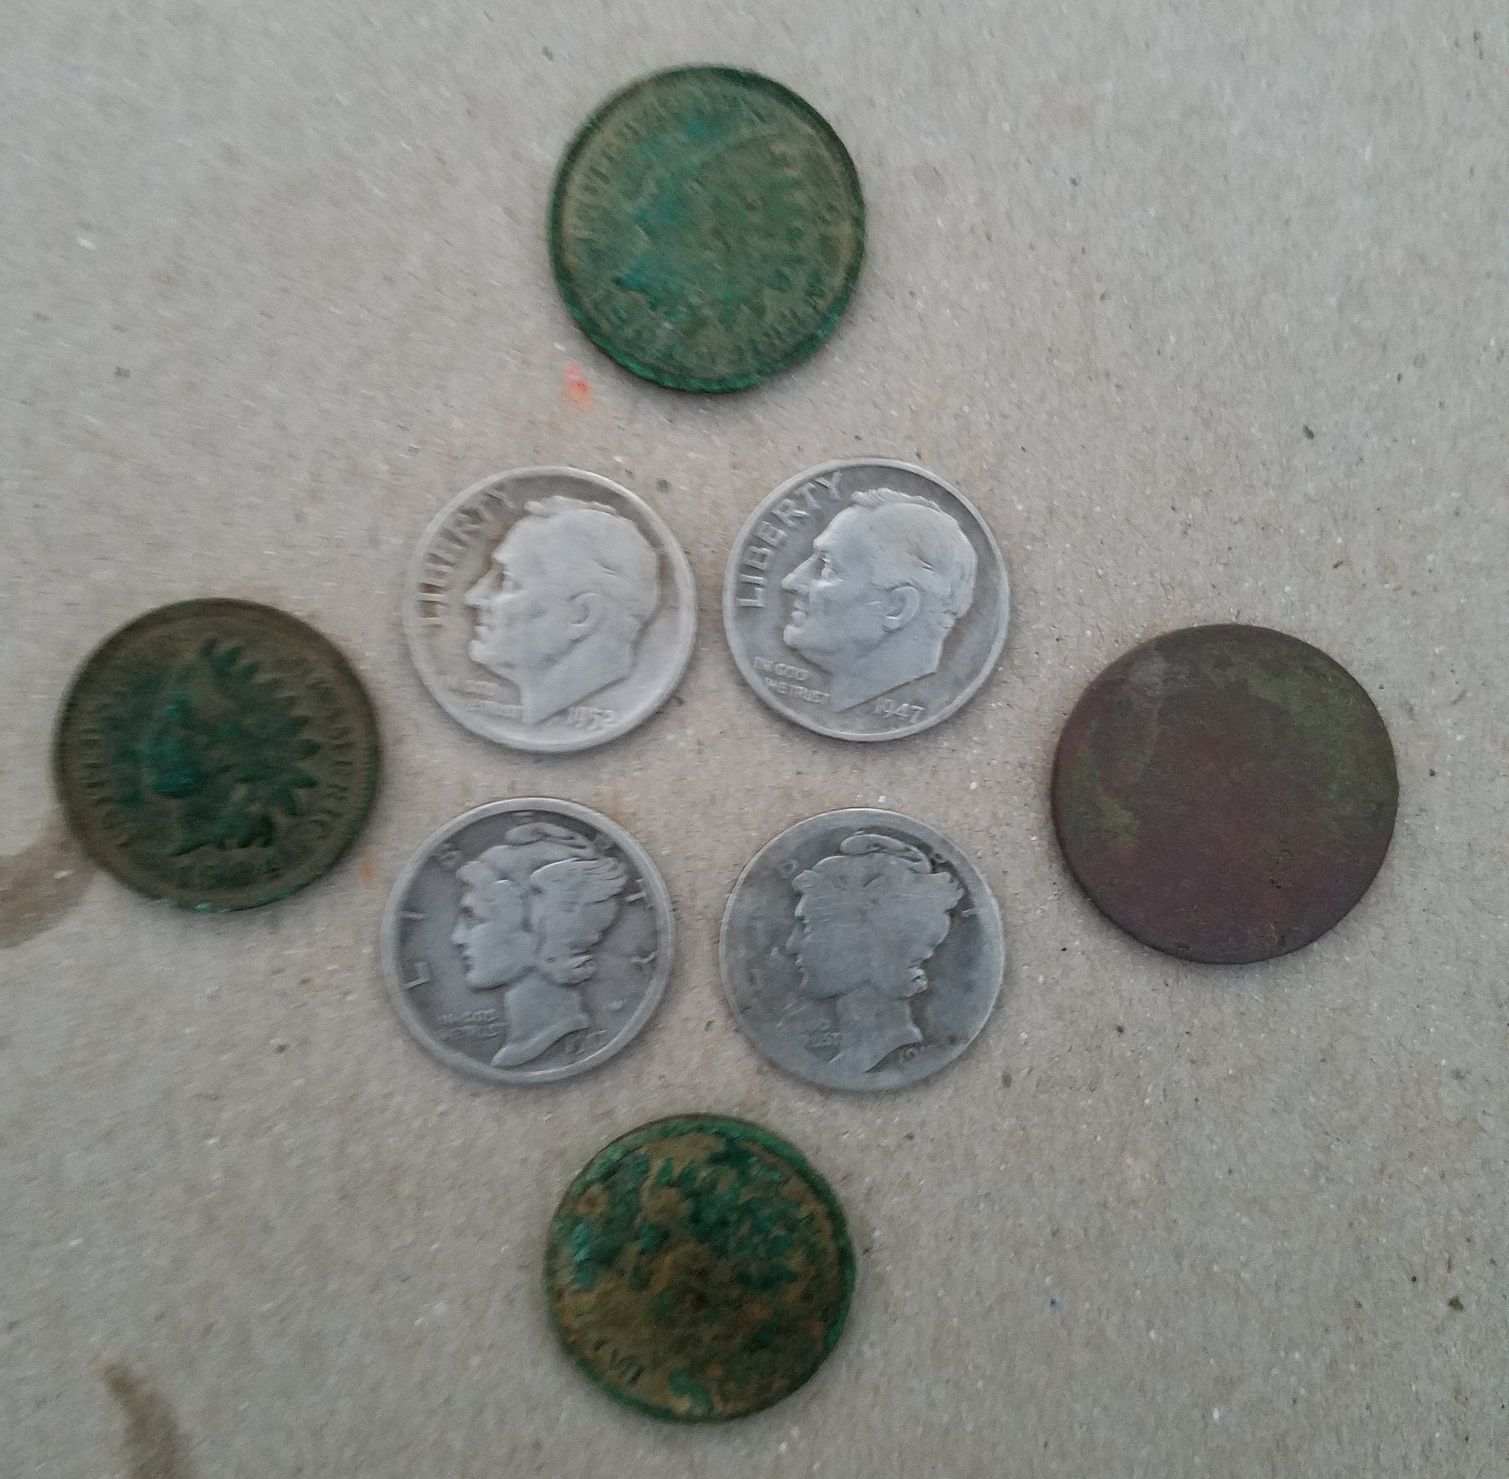 20160425 2 Mercs, 2 Rosies, 3 IHPs and a V Nickel found with the F75 in Madison.